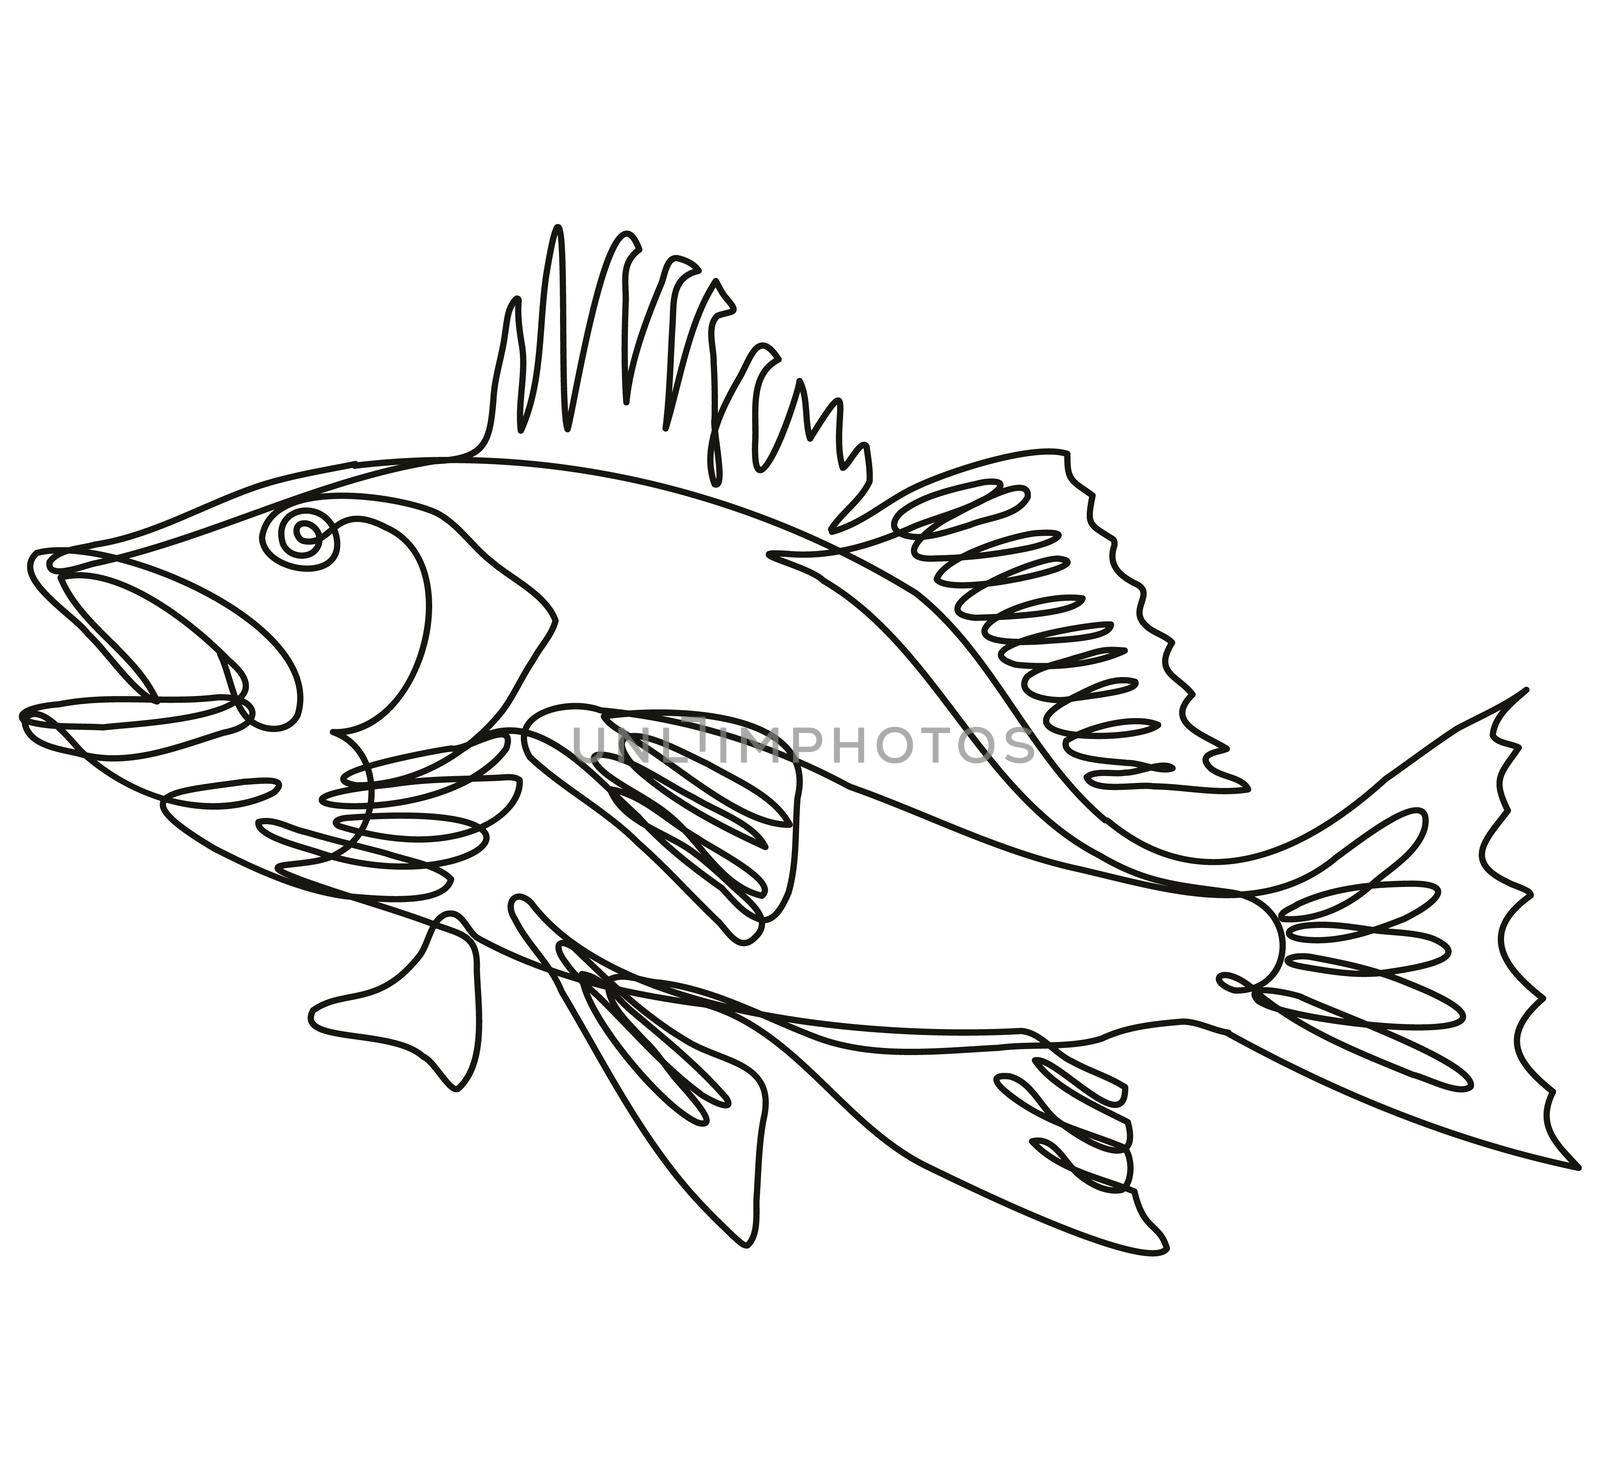 Continuous line drawing illustration of a largemouth bass jumping up side view in mono line or doodle style in black and white on isolated background. 